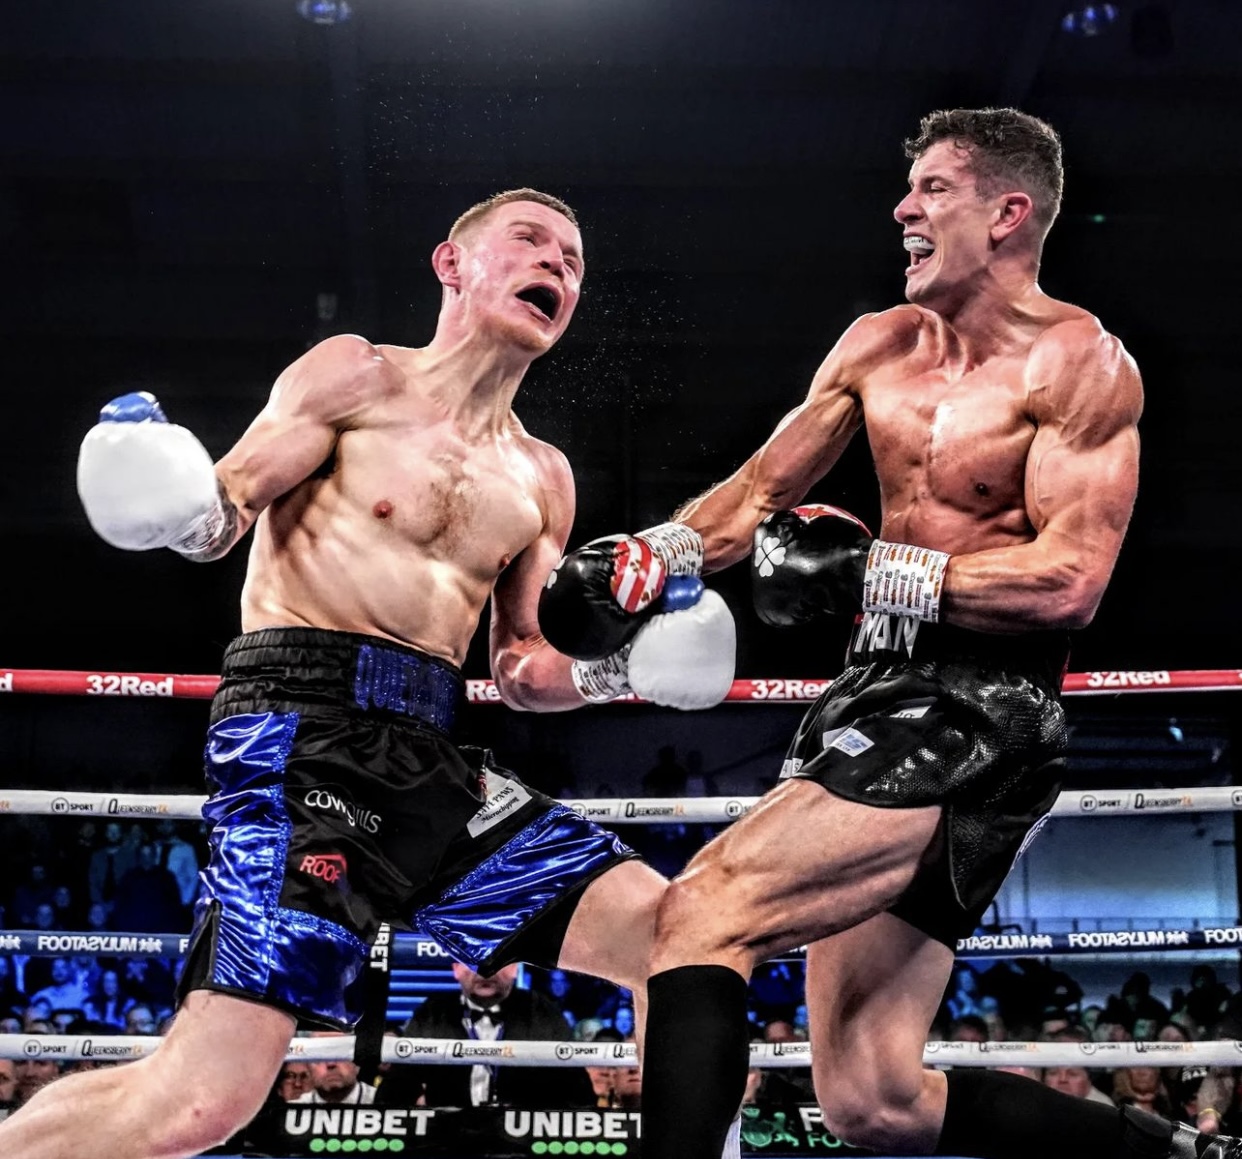 Heaney defeats Flatley and is new WBA Continental champion